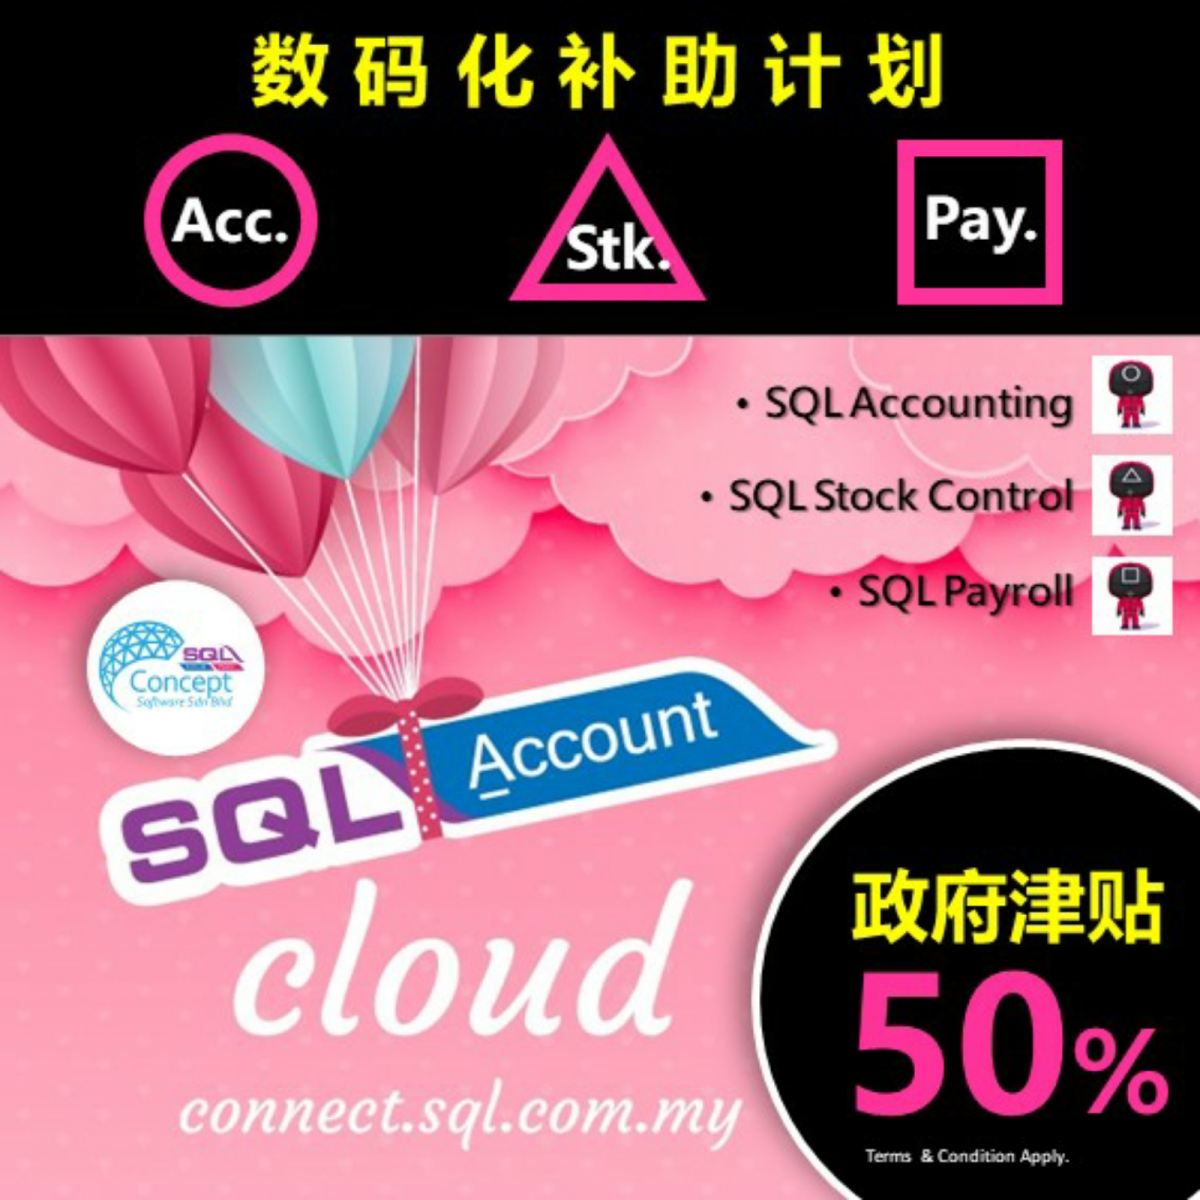 ԰Accounting, Stock Control, Payroll, תƶ˻ 

 ͨƶ(Cloud)ִлƵĿ: Account GL, Check Customer/Supplier Statement, Print/Send Invoice, DO, CN, Consignment, Bank Reconciliation, Monthly Profit & Loss... 
 нˮһҪ